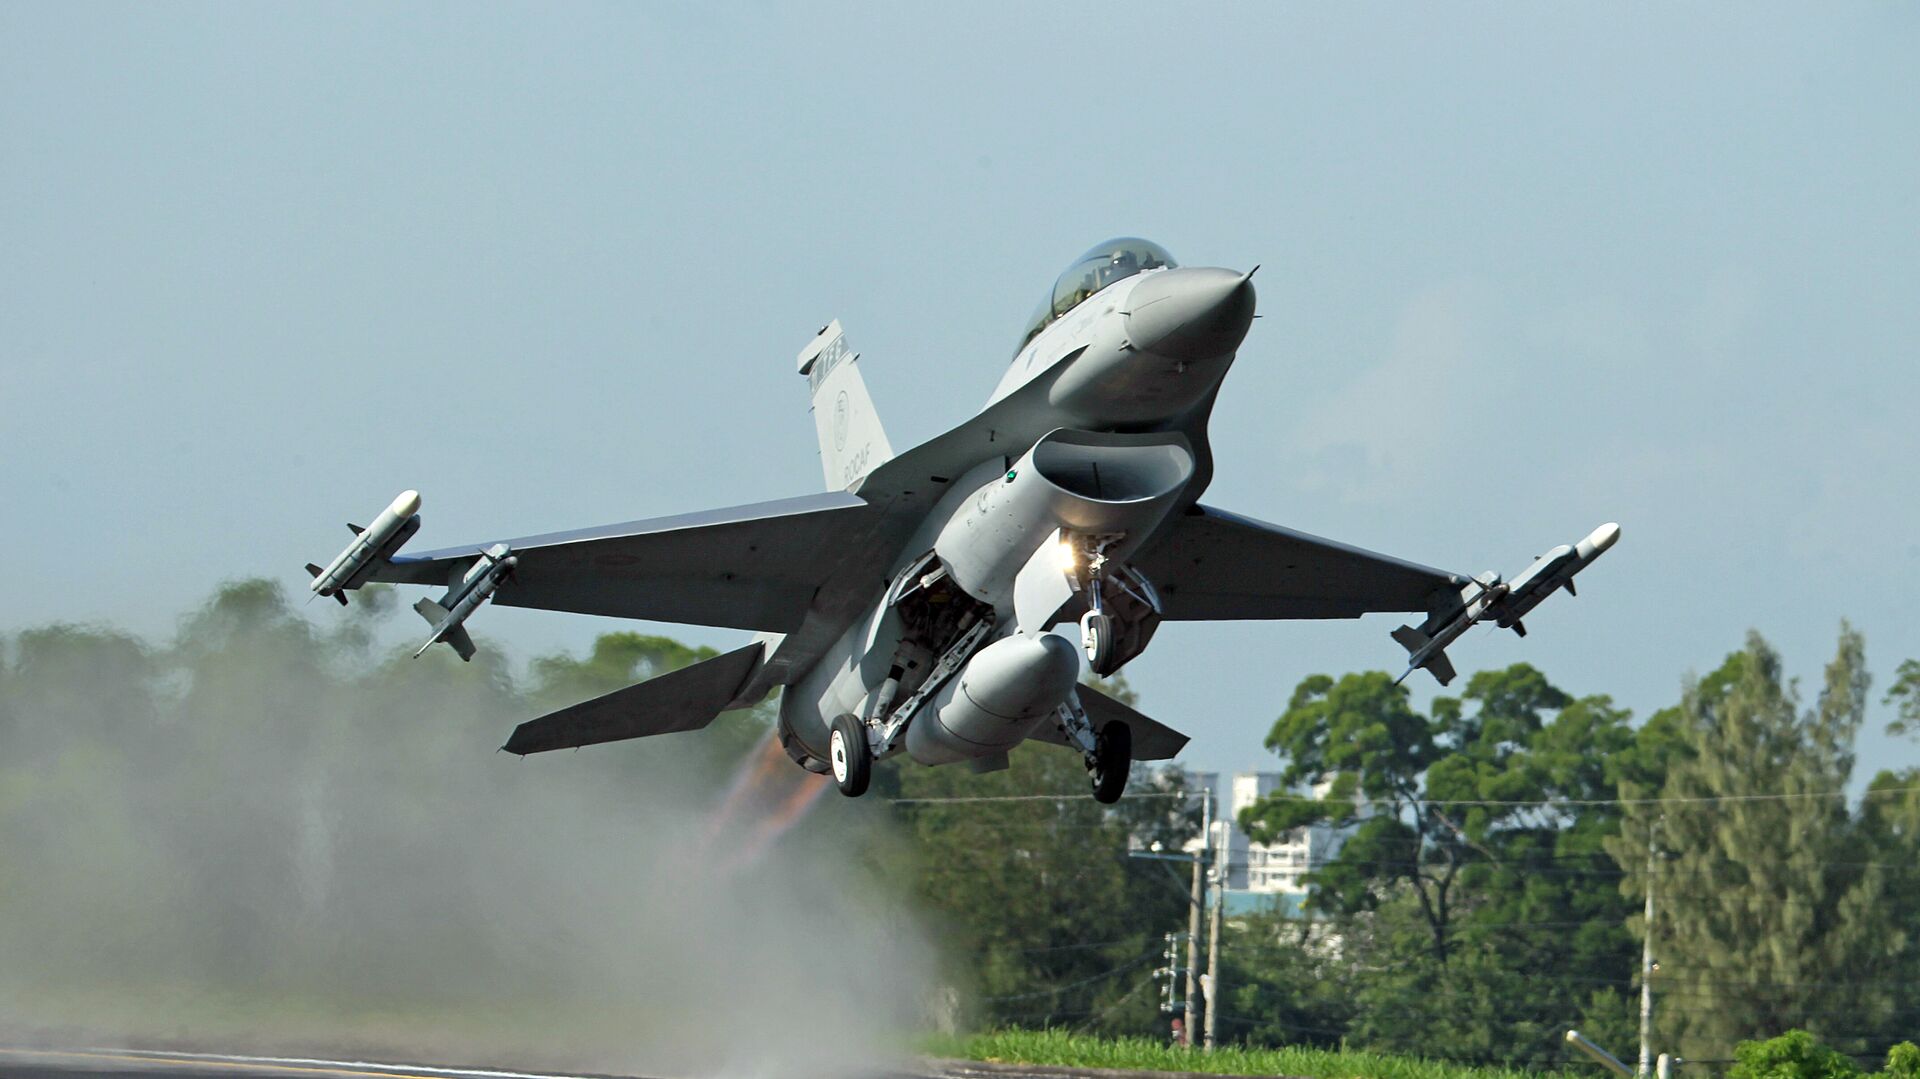  In this Sept. 16, 2014, file photo, a Taiwan Air Force F-16 fighter jet takes off from a closed section of highway during the annual Han Kuang military exercises in Chiayi, central Taiwan - Sputnik International, 1920, 23.05.2022